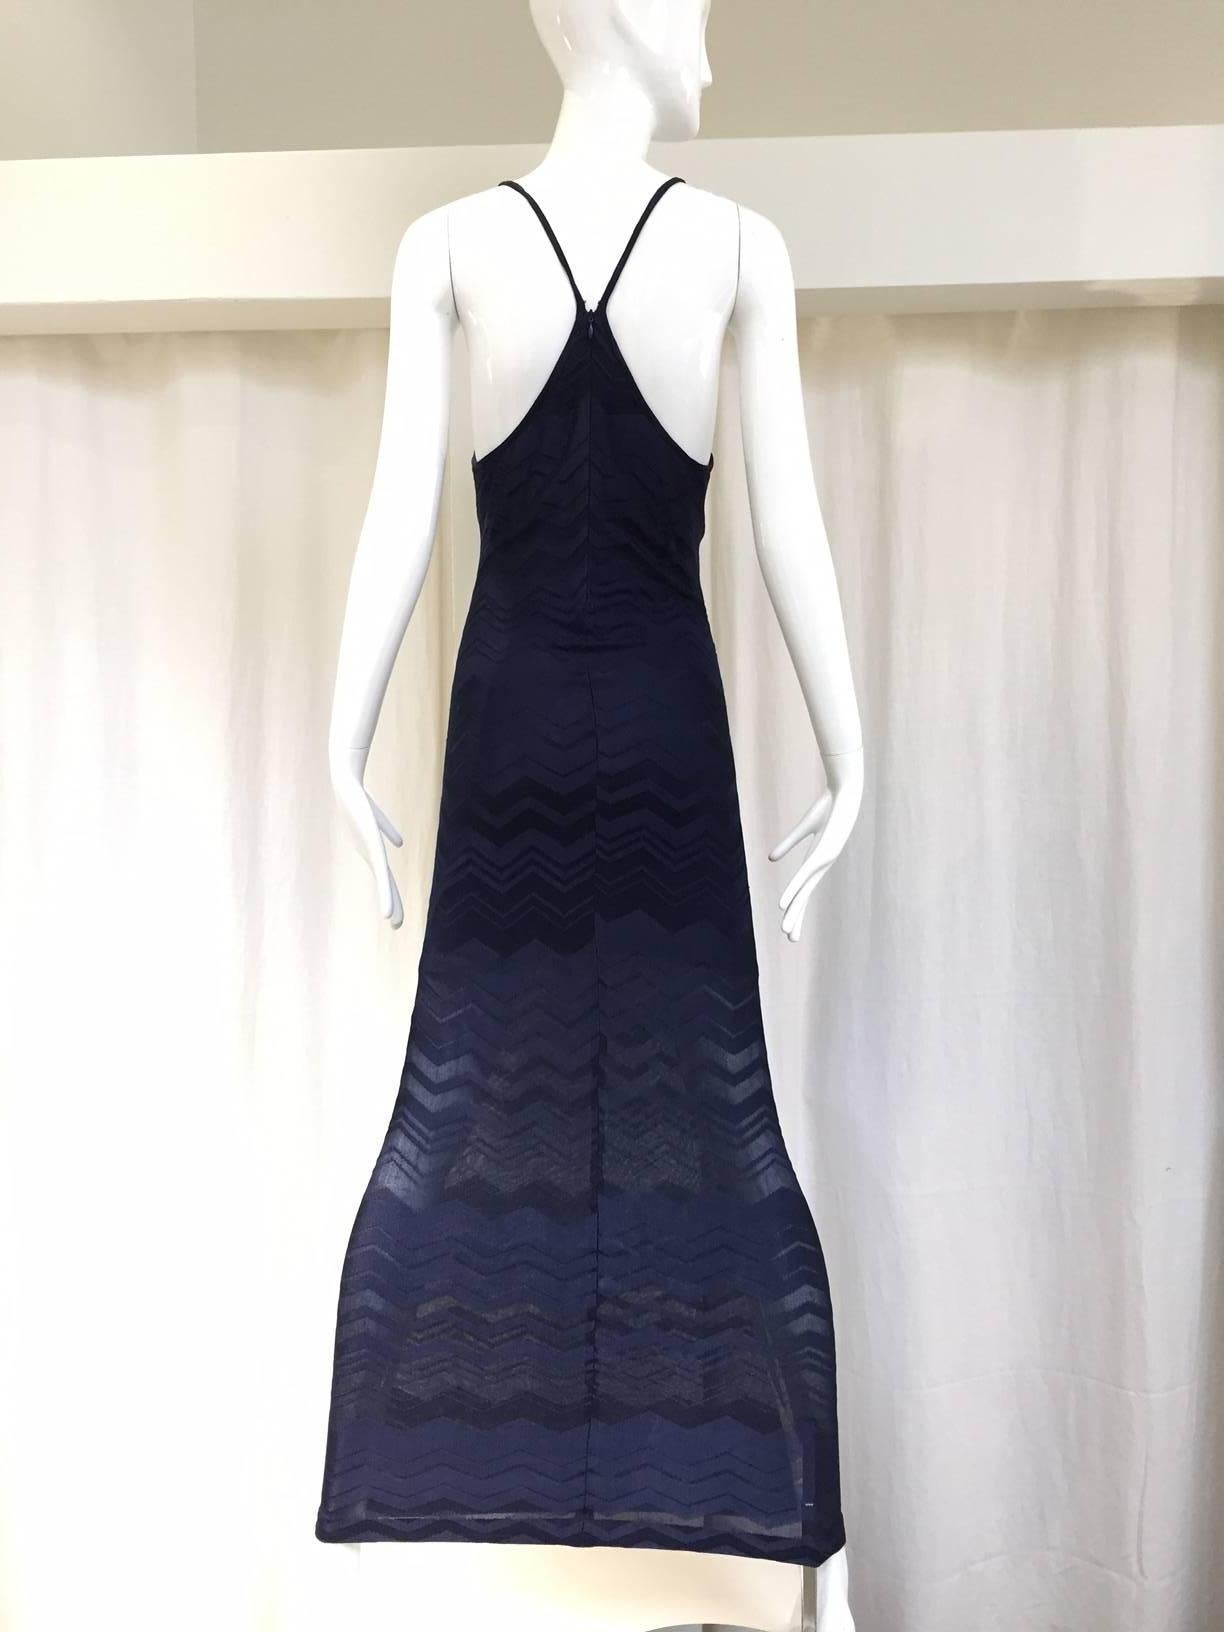 Sexy and sporty 90s Gianfranco Ferre navy blue knit dress with racer back. 
Bust: 32